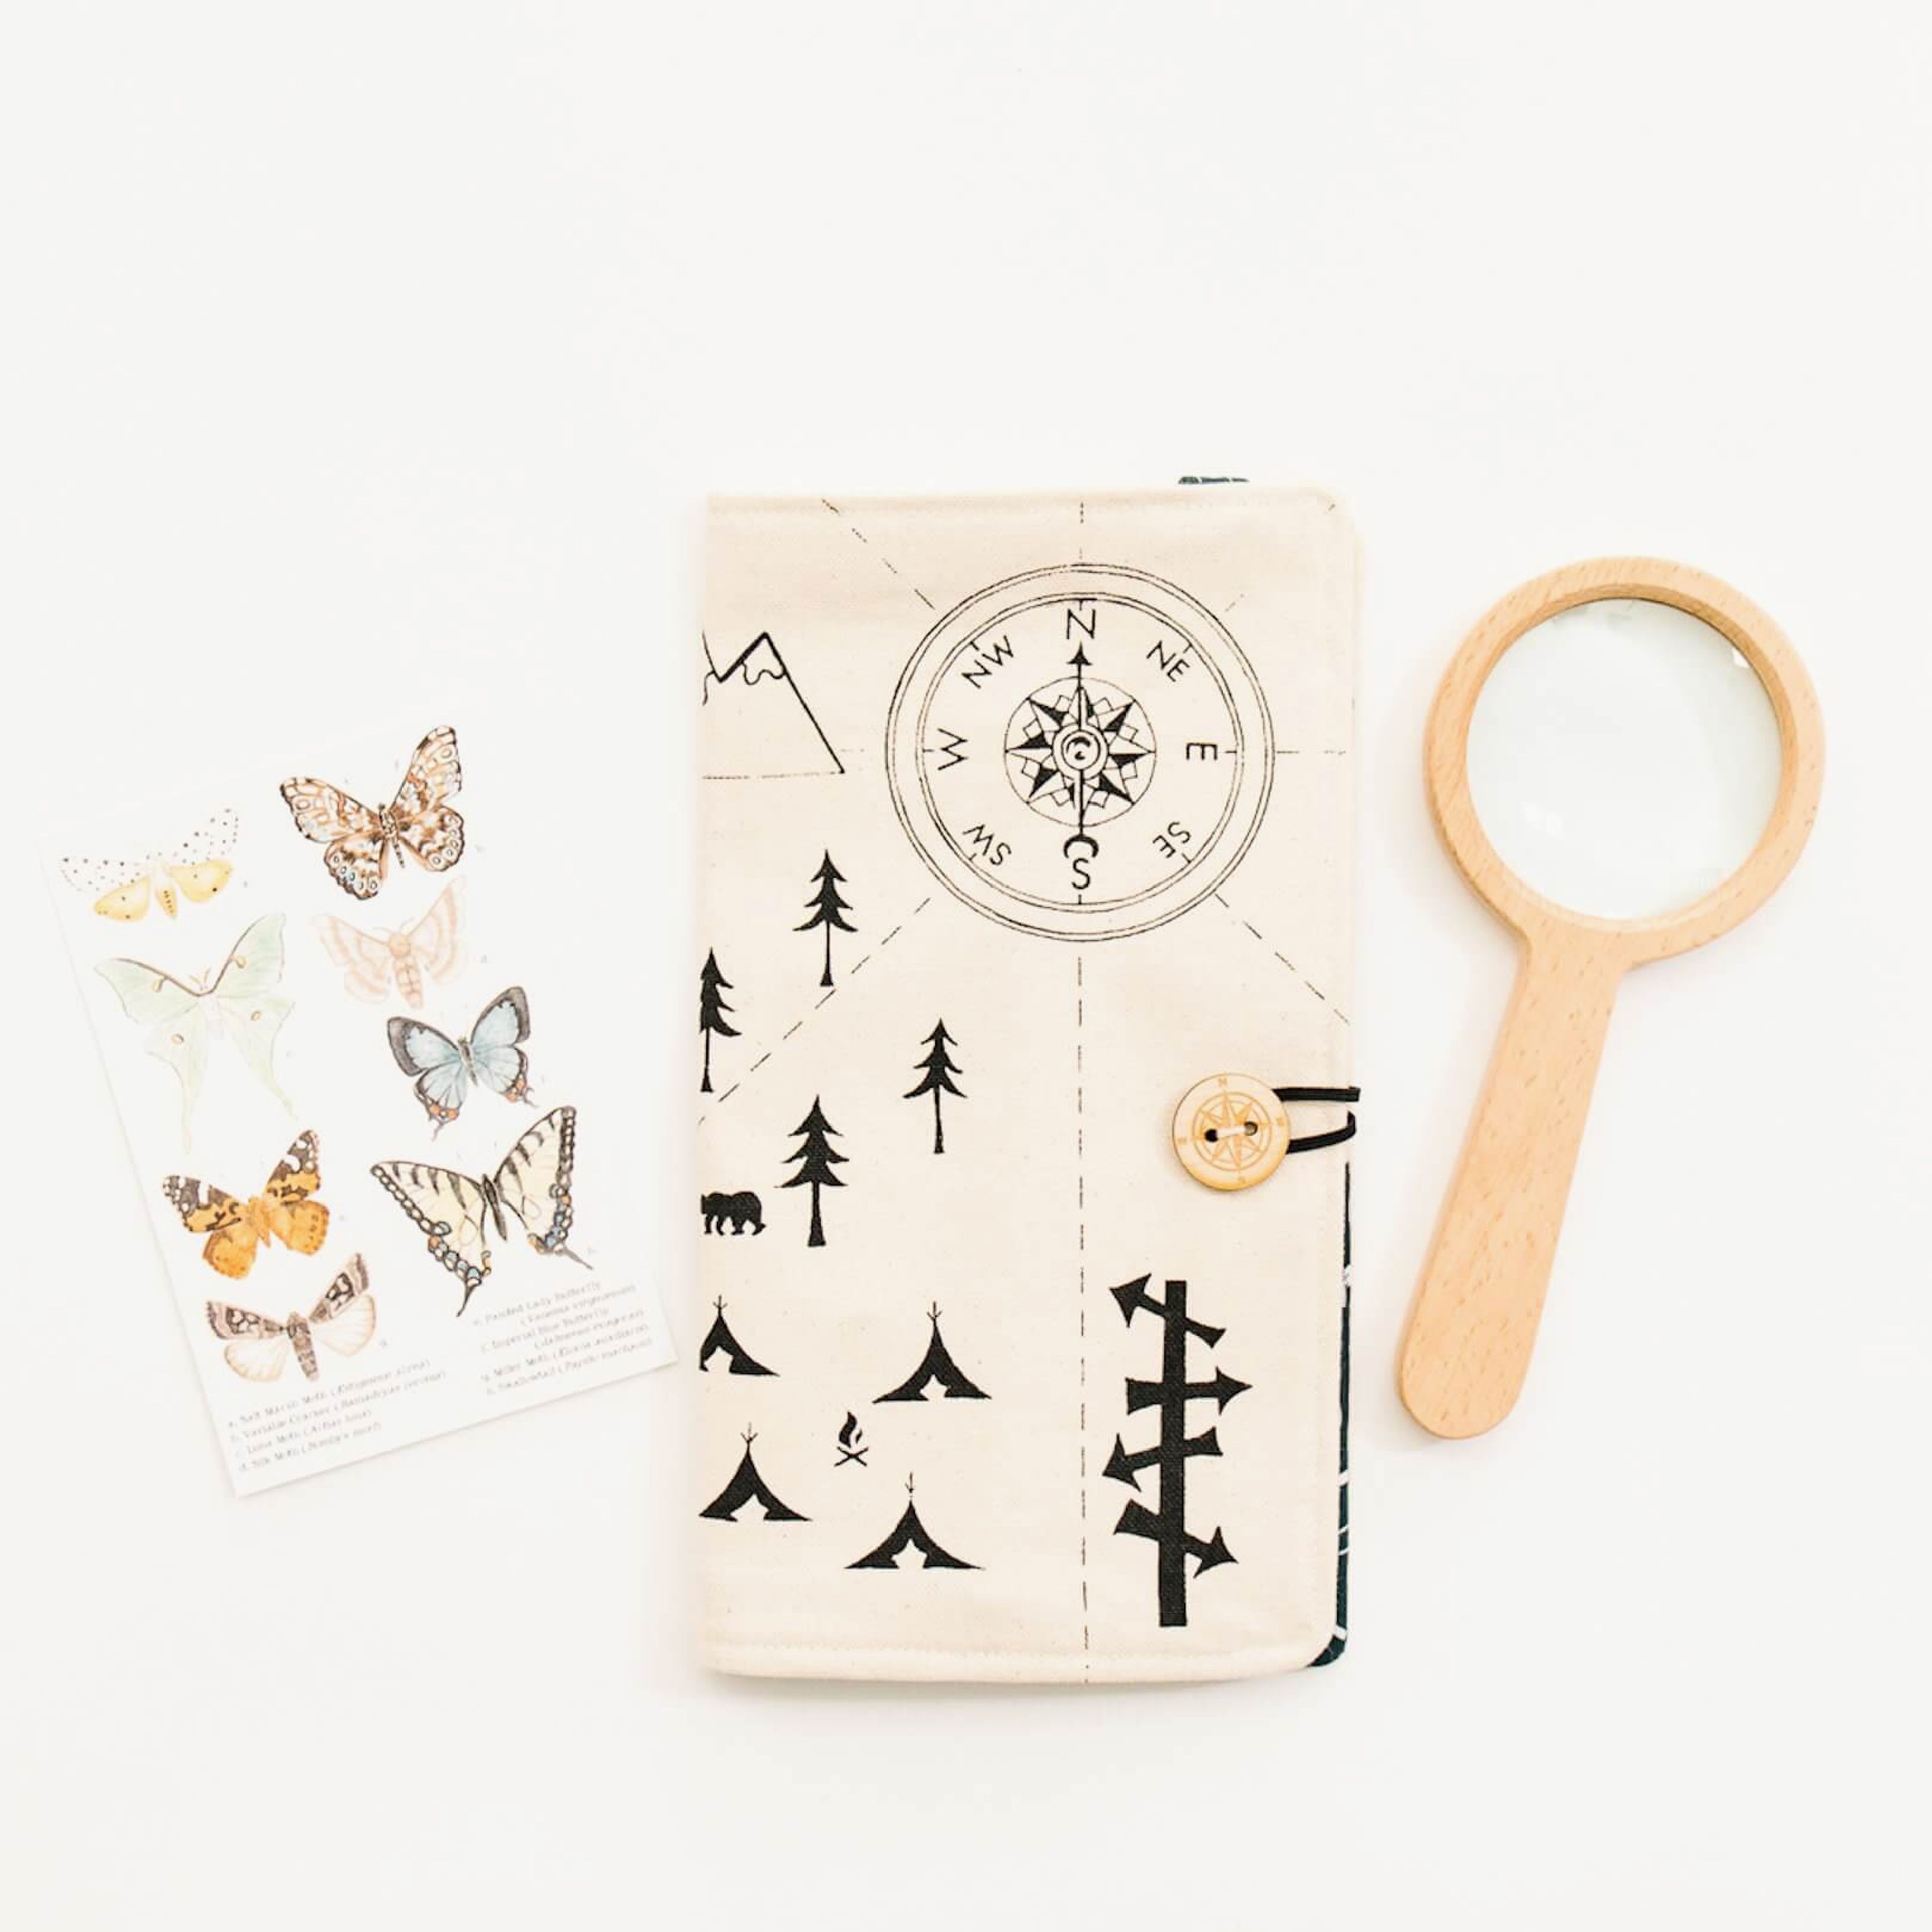 Travel Wallet for Kids: "For kiddos who love adventures!"